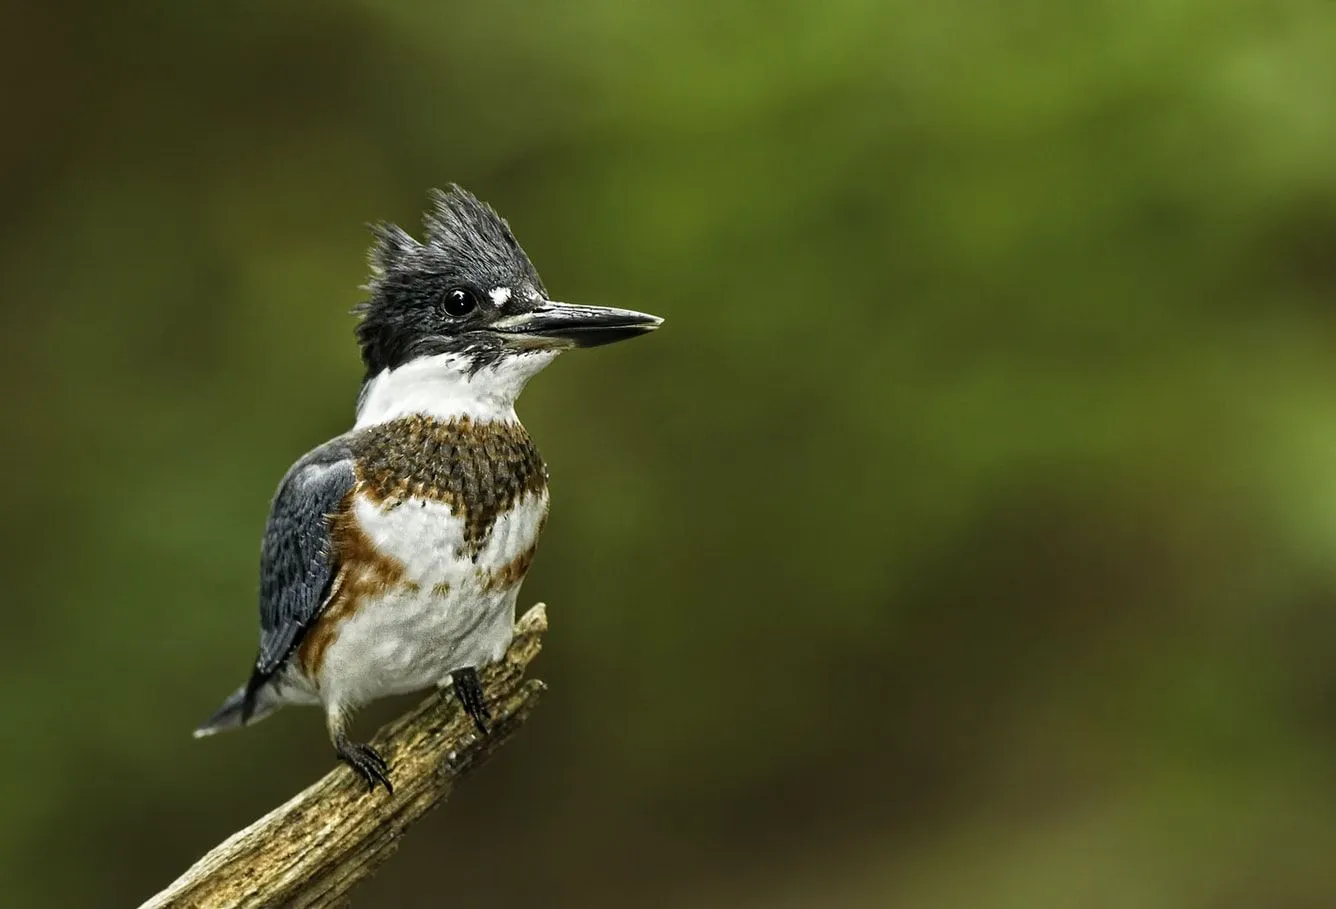 Belted Kingfishers sometimes enter human residencies in search of food.